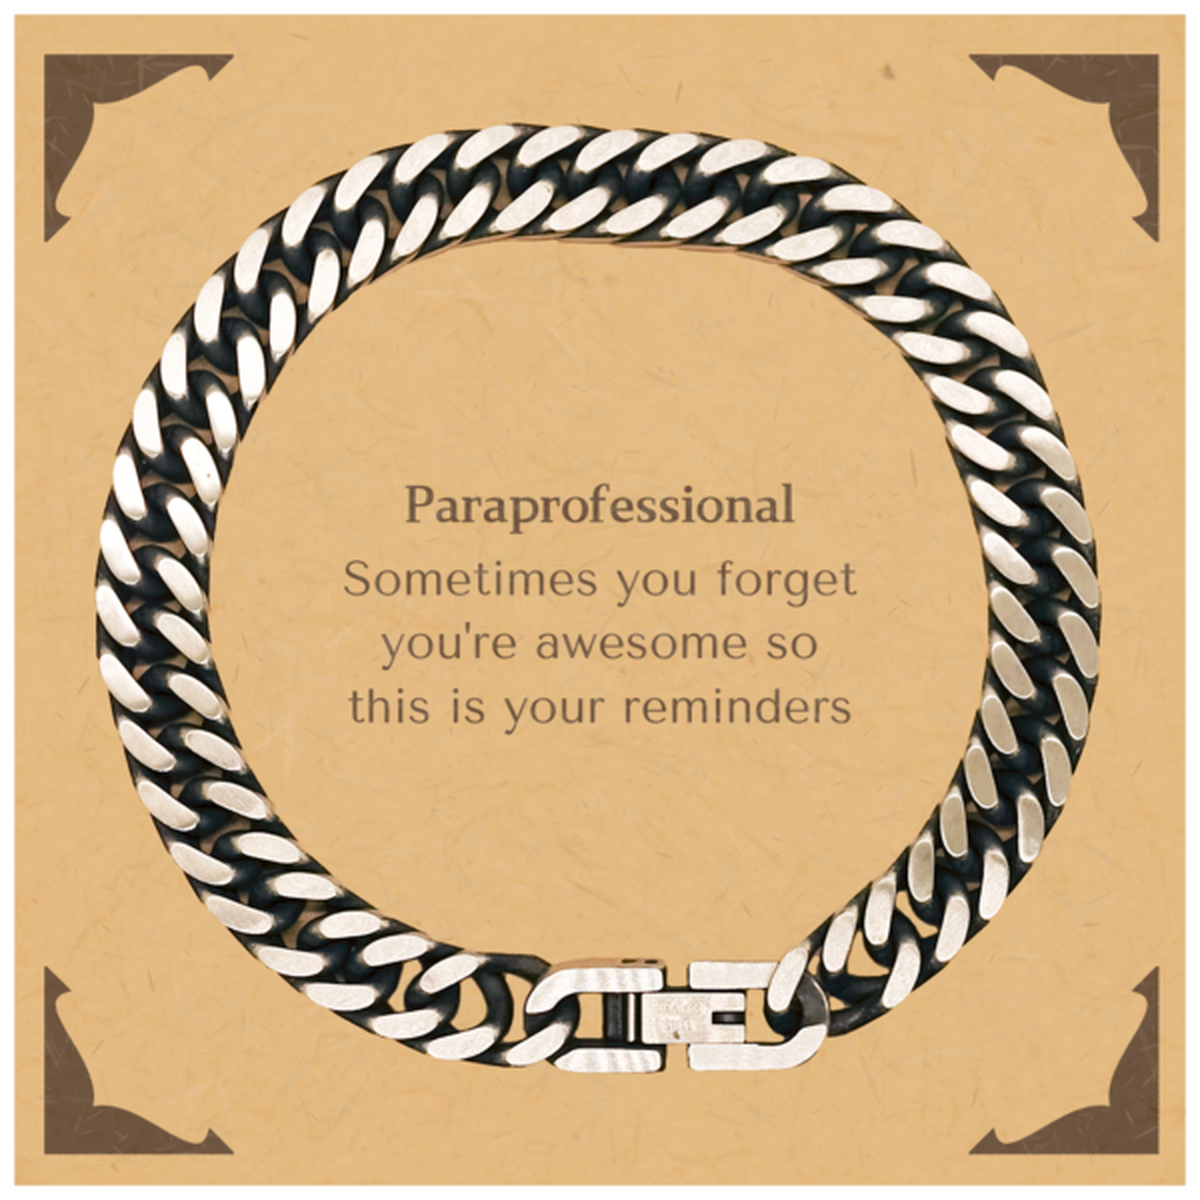 Sentimental Paraprofessional Cuban Link Chain Bracelet, Paraprofessional Sometimes you forget you're awesome so this is your reminders, Graduation Christmas Birthday Gifts for Paraprofessional, Men, Women, Coworkers